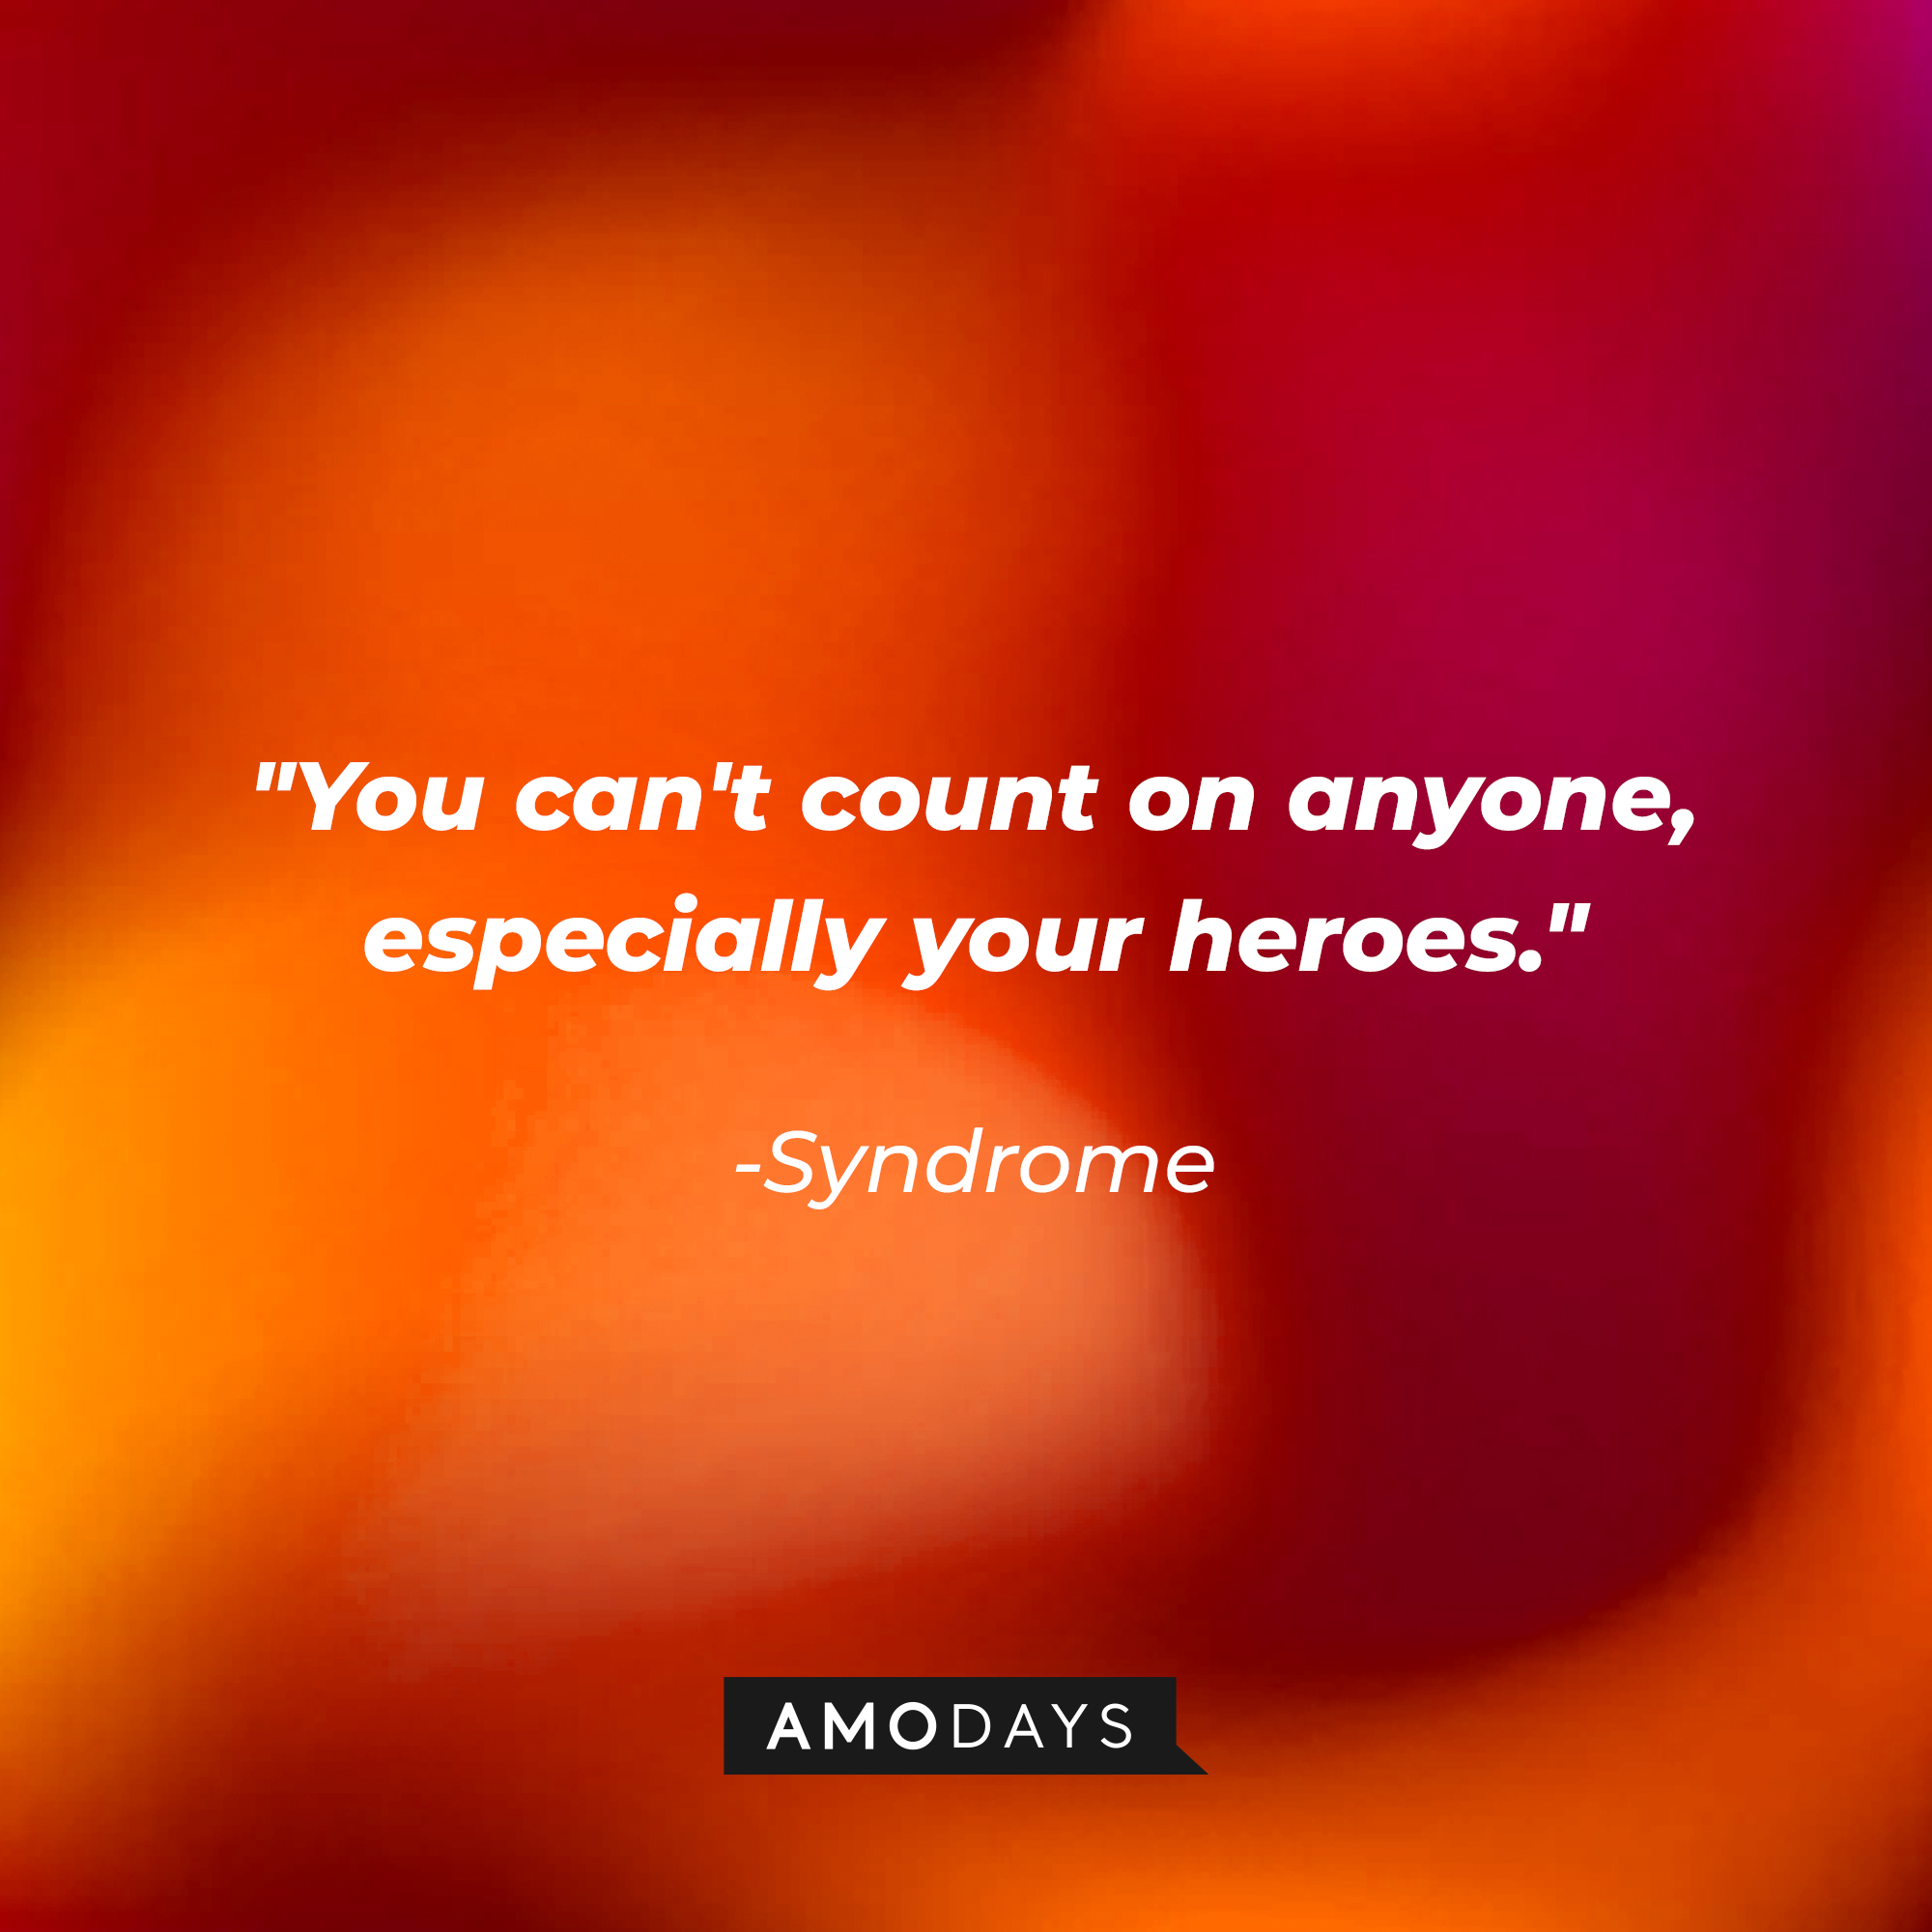 Syndrome's quote: "You can't count on anyone, especially your heroes" | Source: Amodays